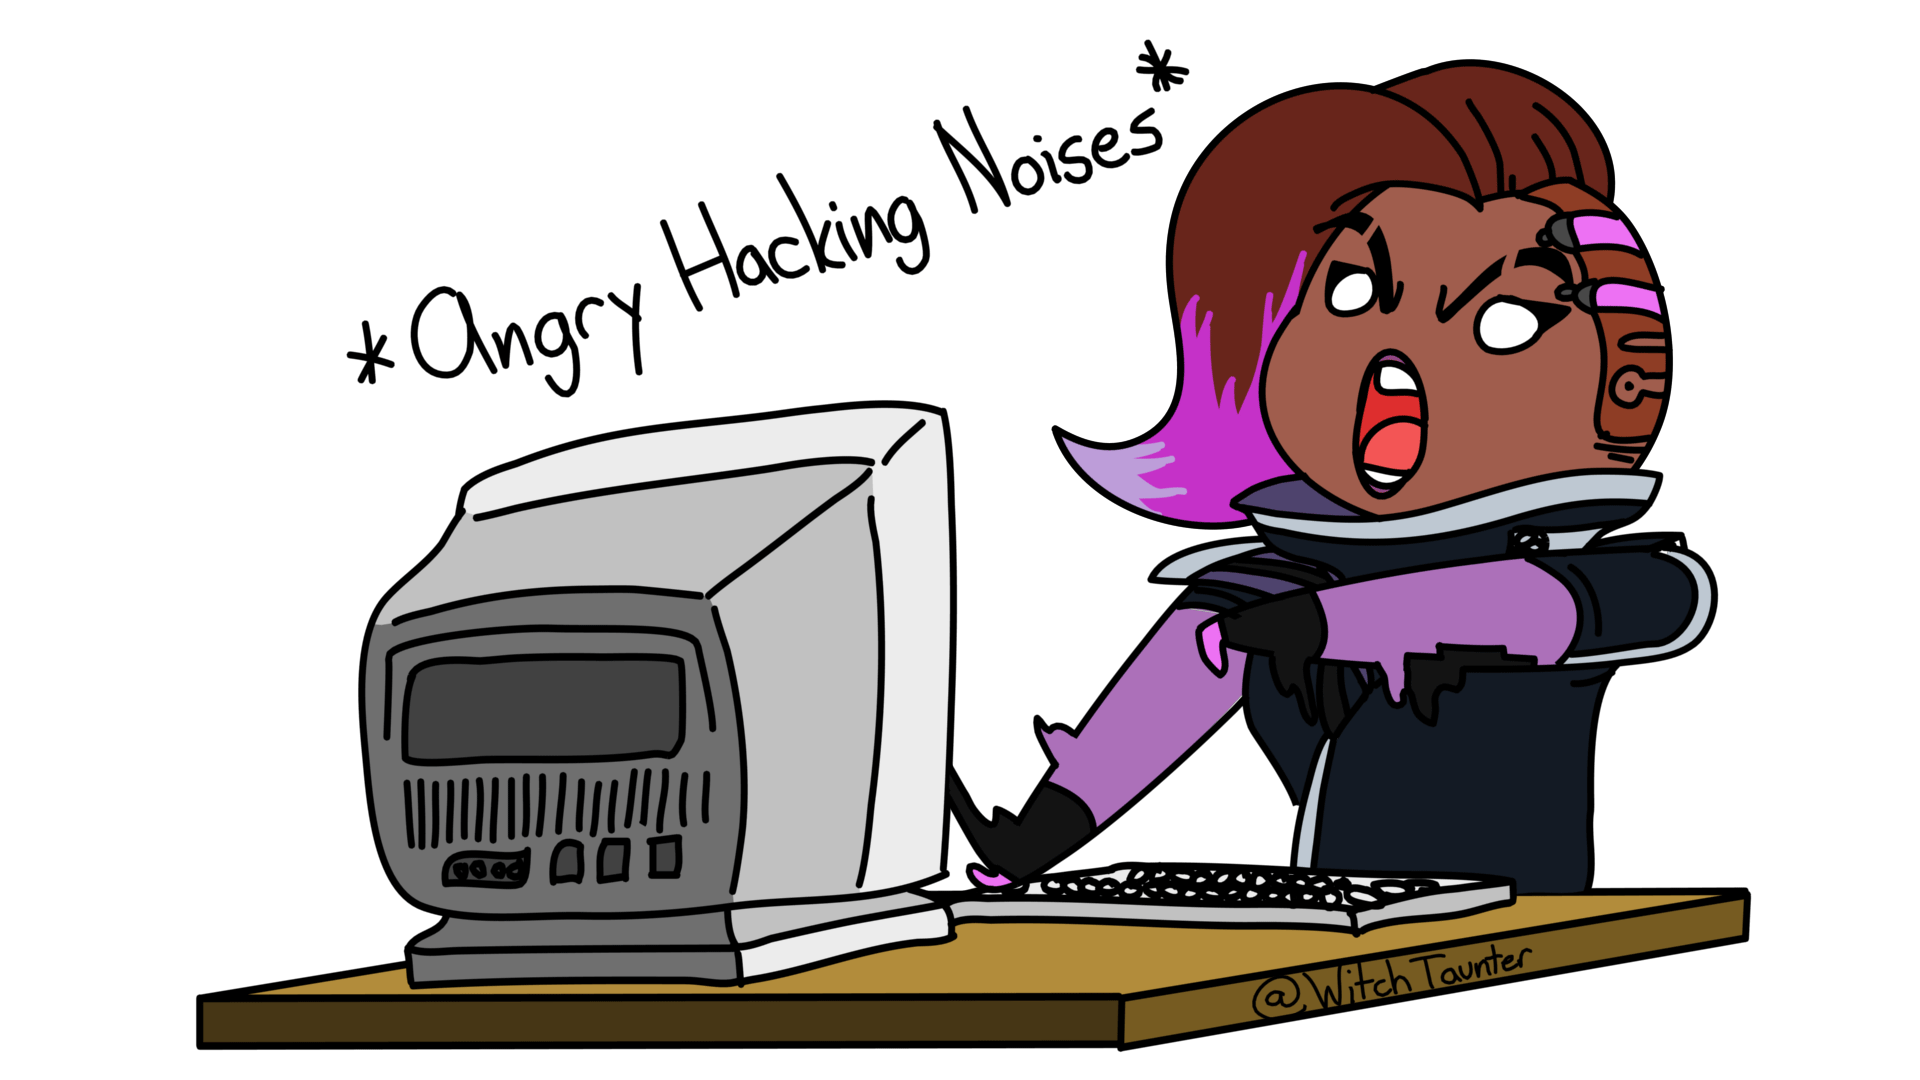 Jpg Black And White Sombra Does A Hack Overwatch Know - Sombra Hacking Noises , HD Wallpaper & Backgrounds